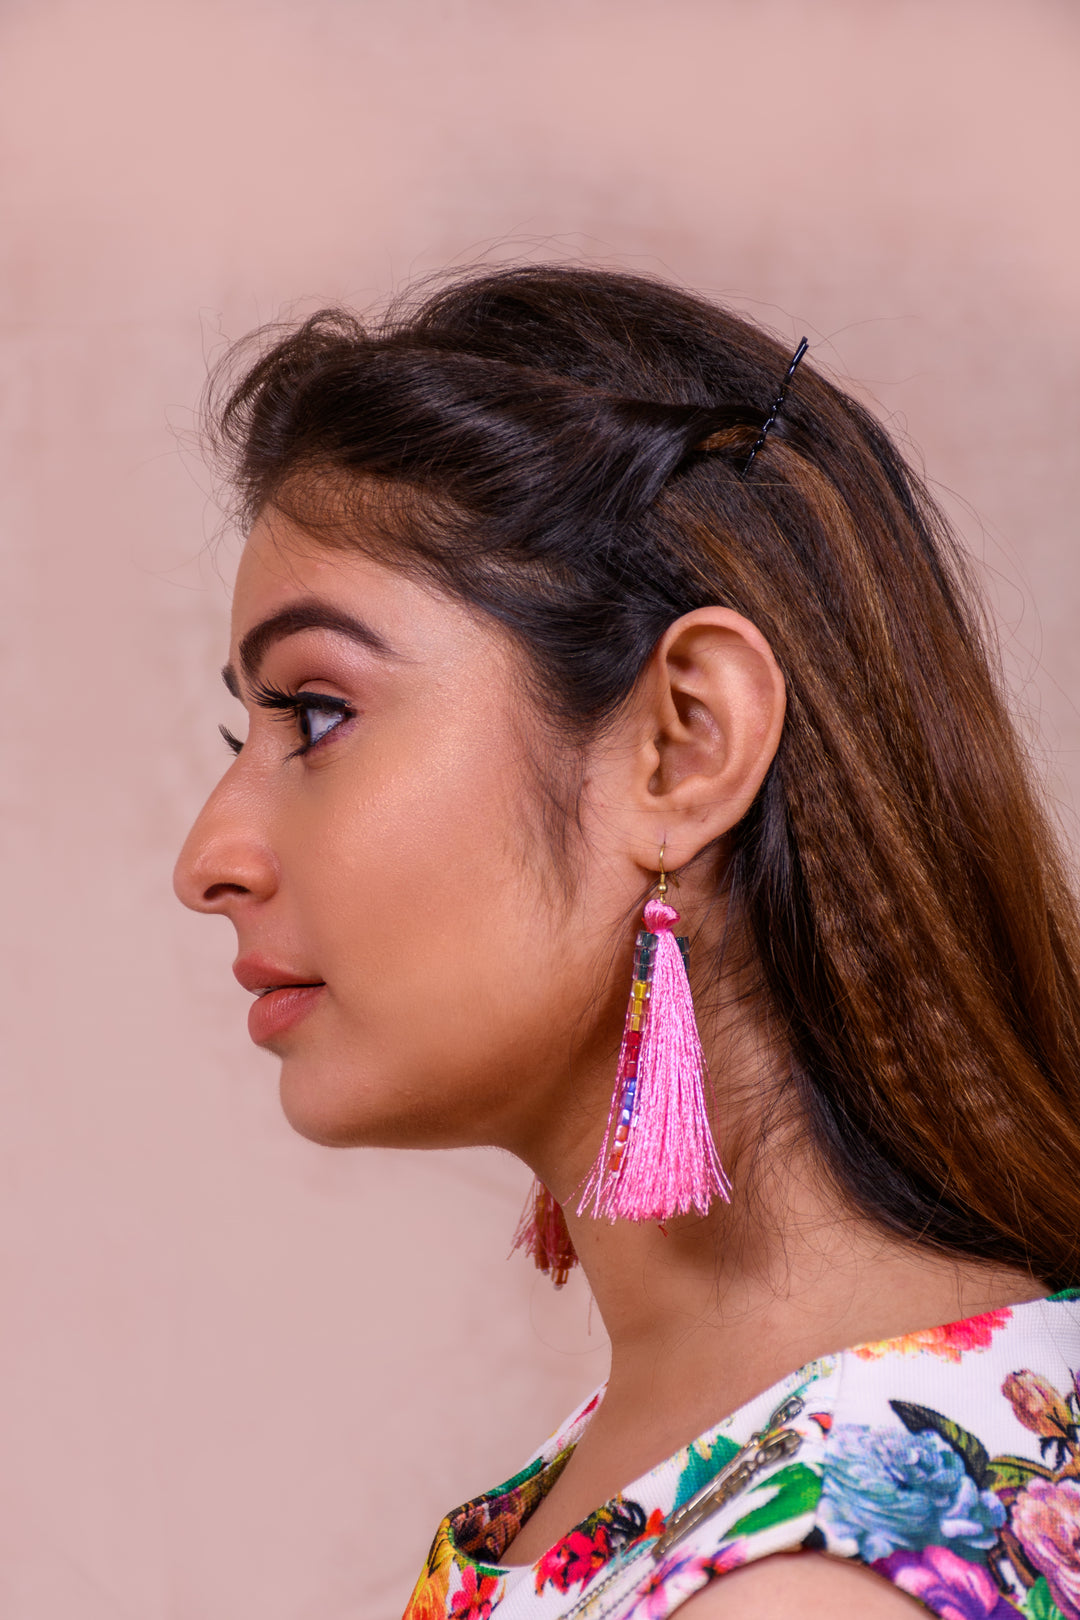 Pink Tassel Earing With Multi Color Beads Strings At The Front